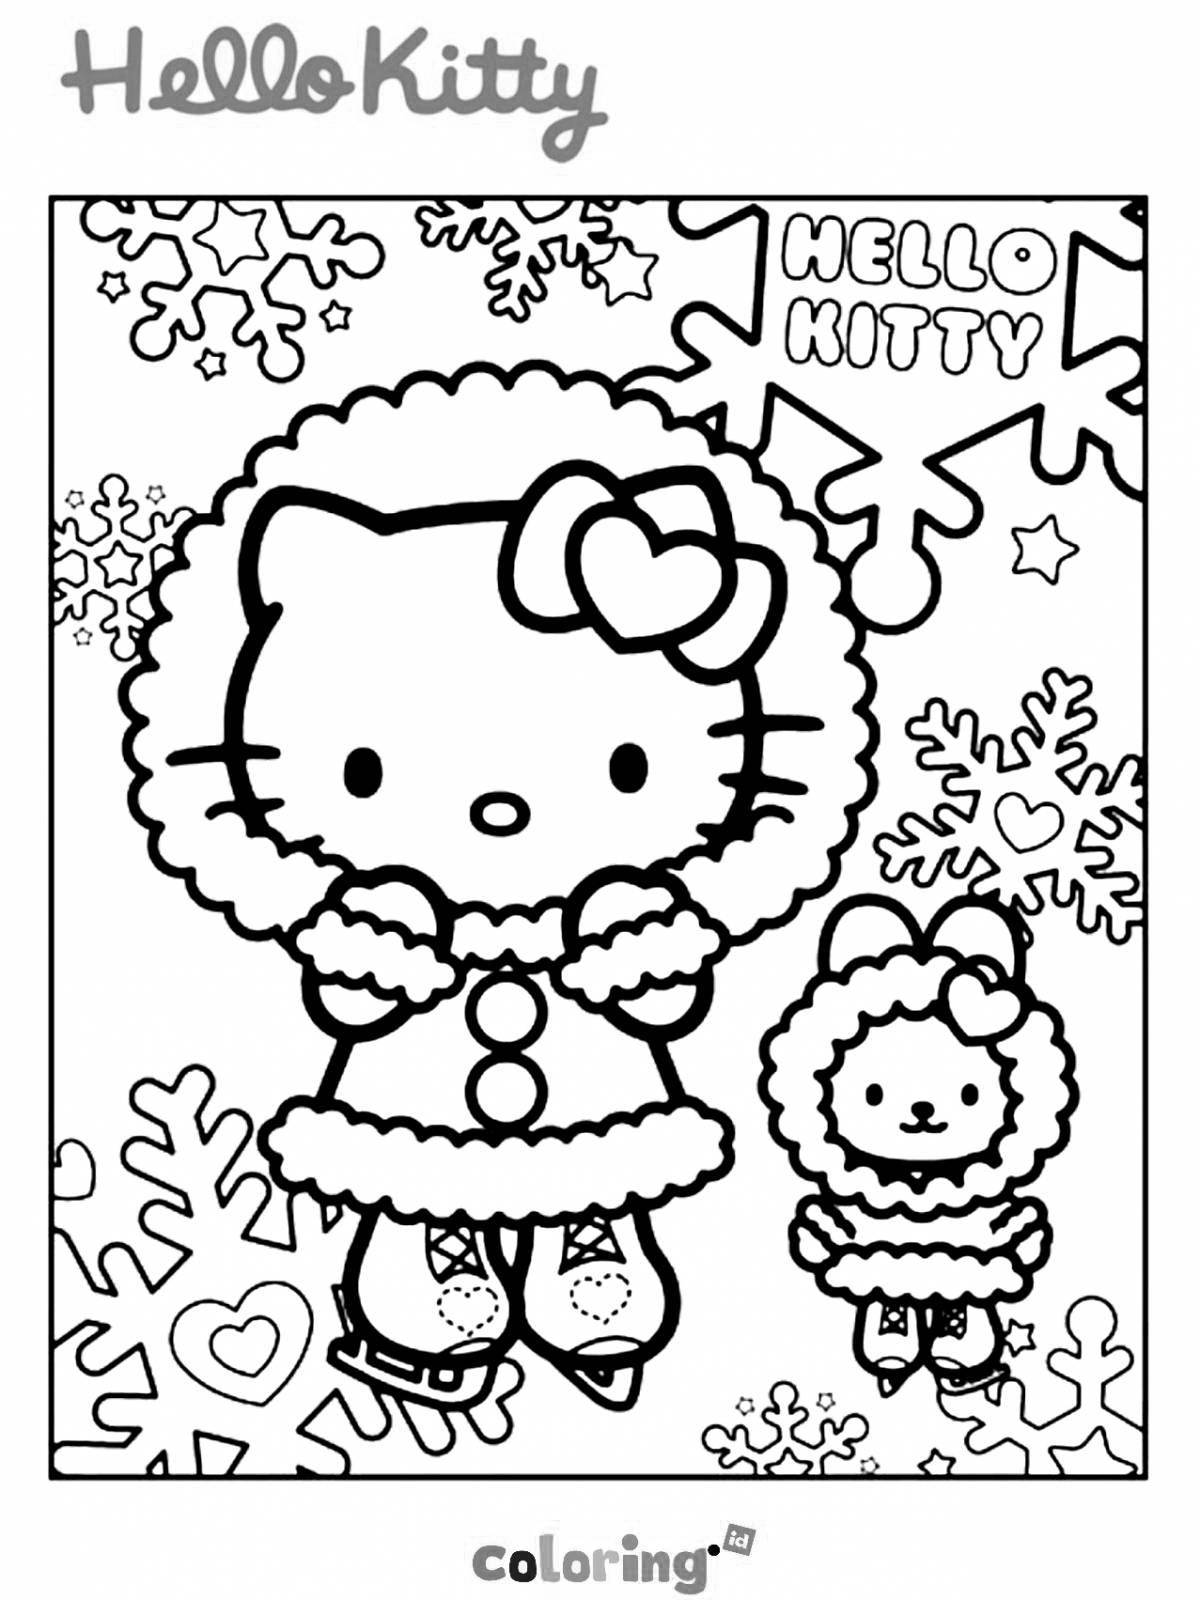 Playtime christmas kitty coloring page